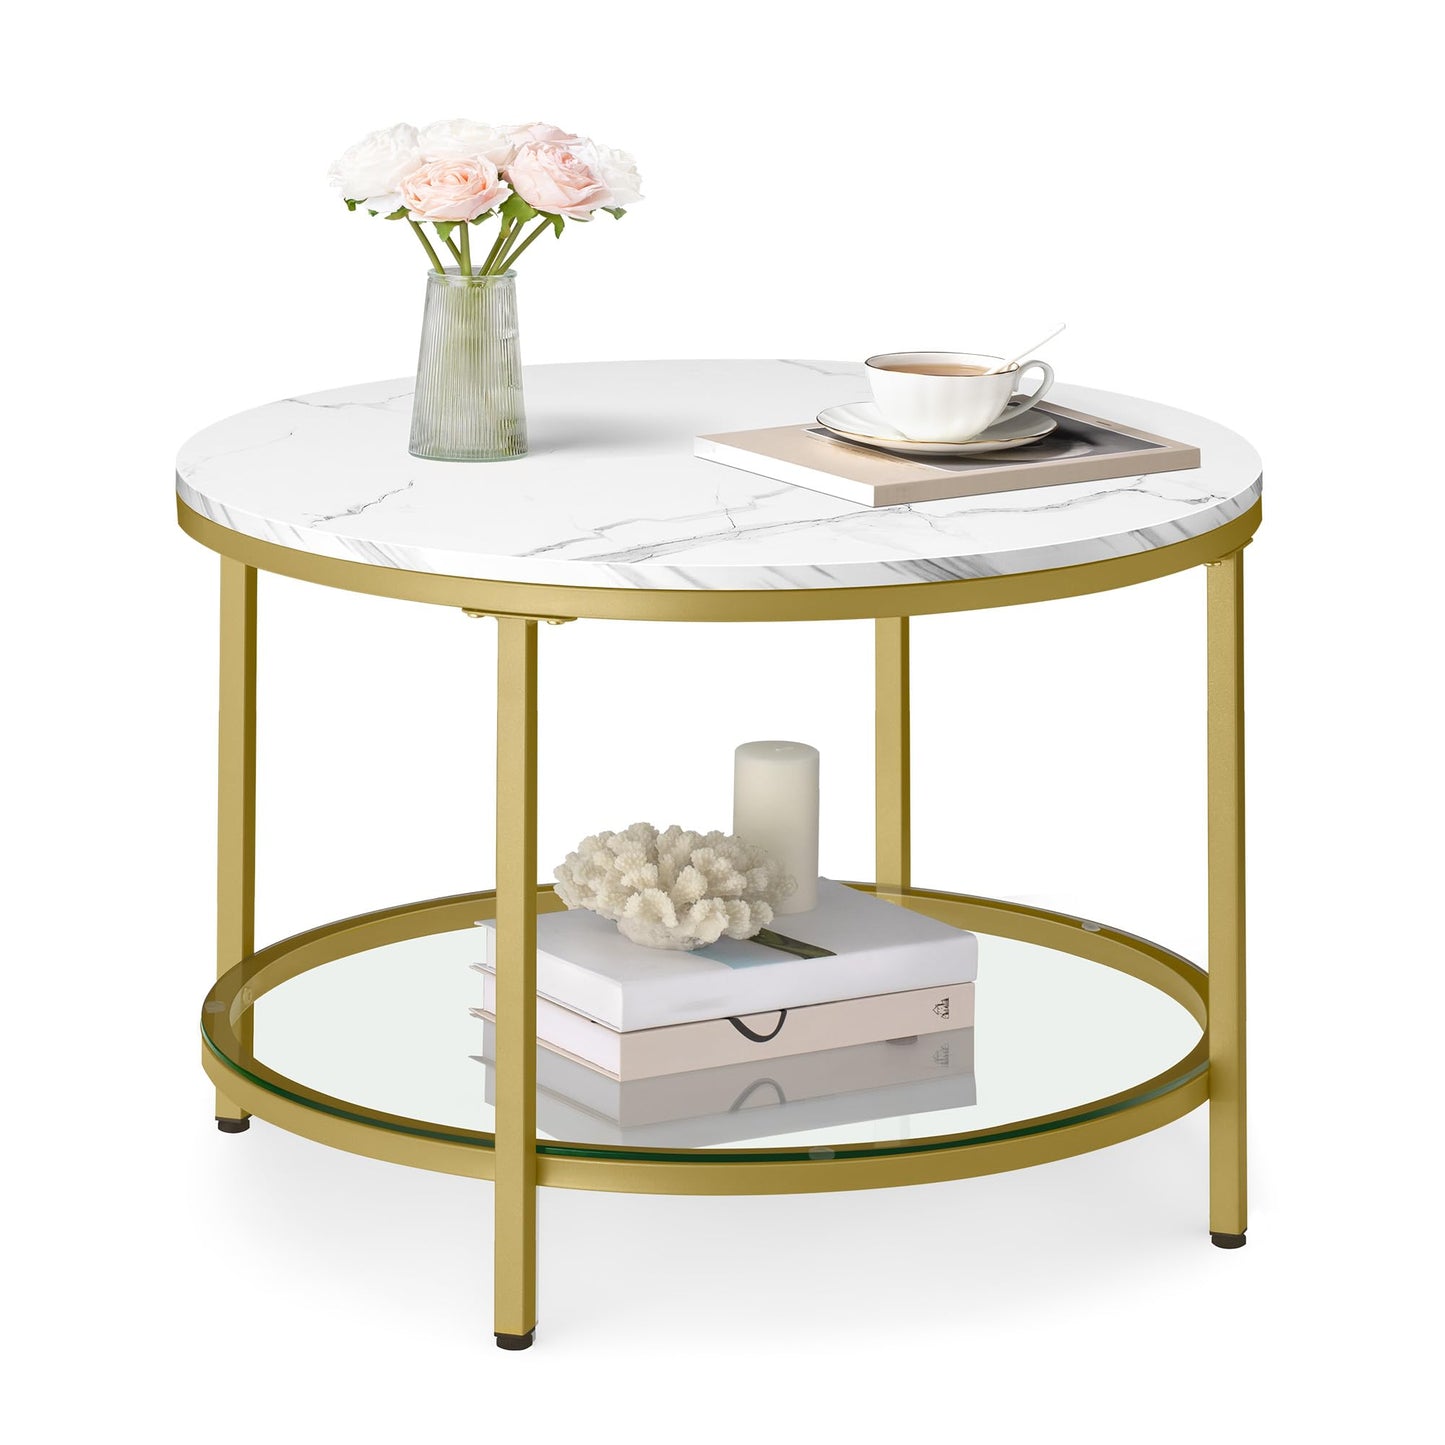 VASAGLE Round Coffee Table, Small Coffee Table with Faux Marble Top and Glass Storage Shelf, 2-Tier Circle Coffee Table, Modern Center Table for Living Room, Marble White and Pale Gold ULCT072W59